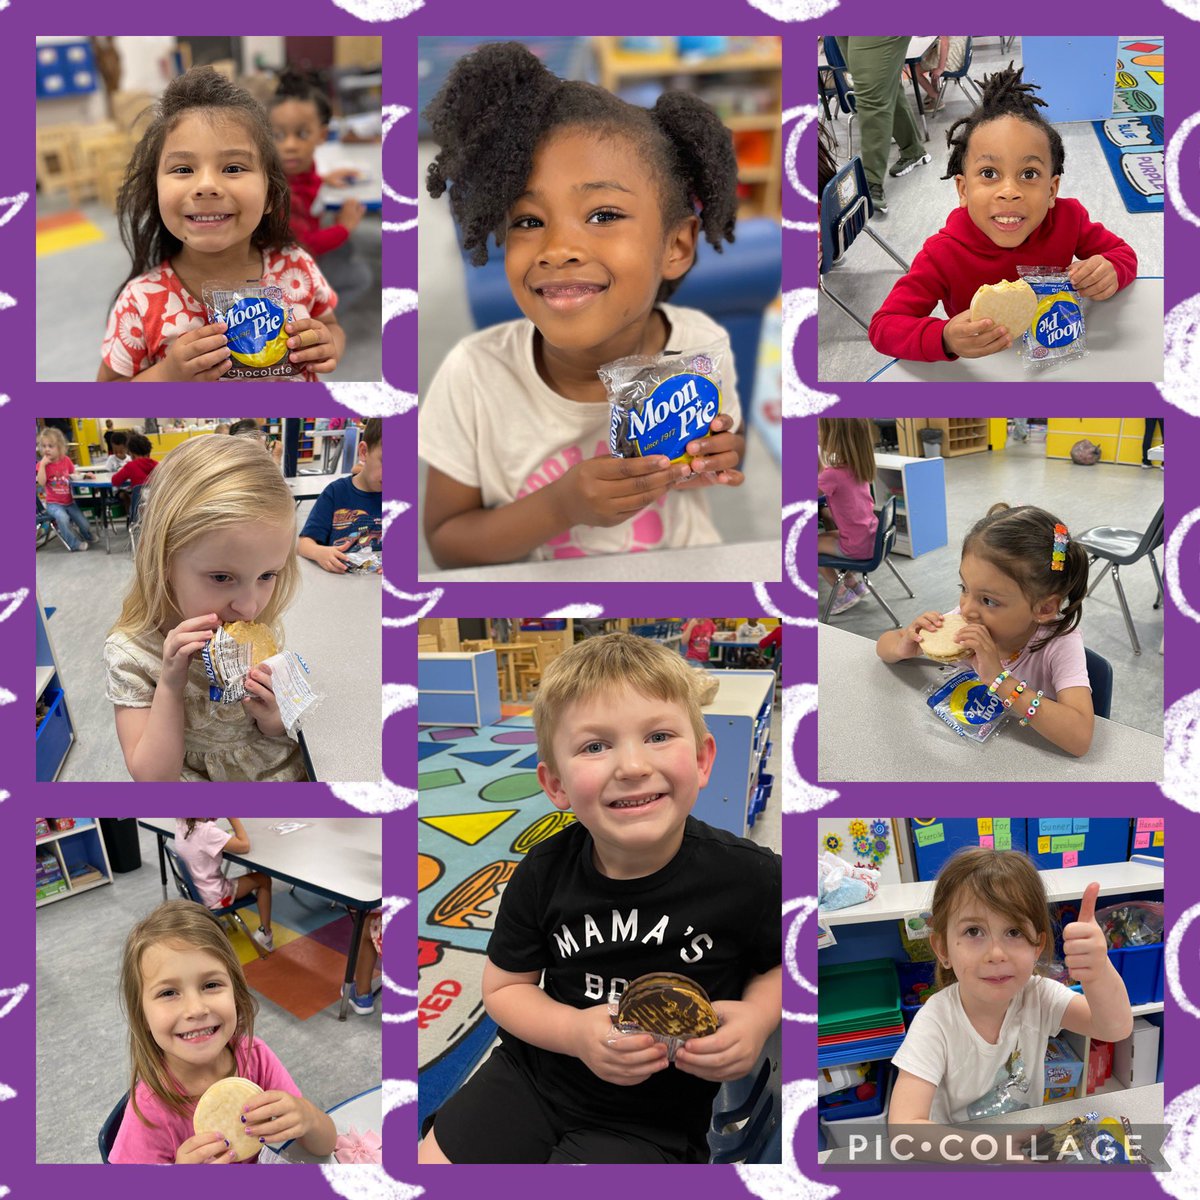 We may not have officially seen the 🕶️🌞🌛solar eclipse but we had a great time learning about it! @CFISDELC1 @CFISDCOMMPROG #EclipseSolar2024 #moonpie #preschool